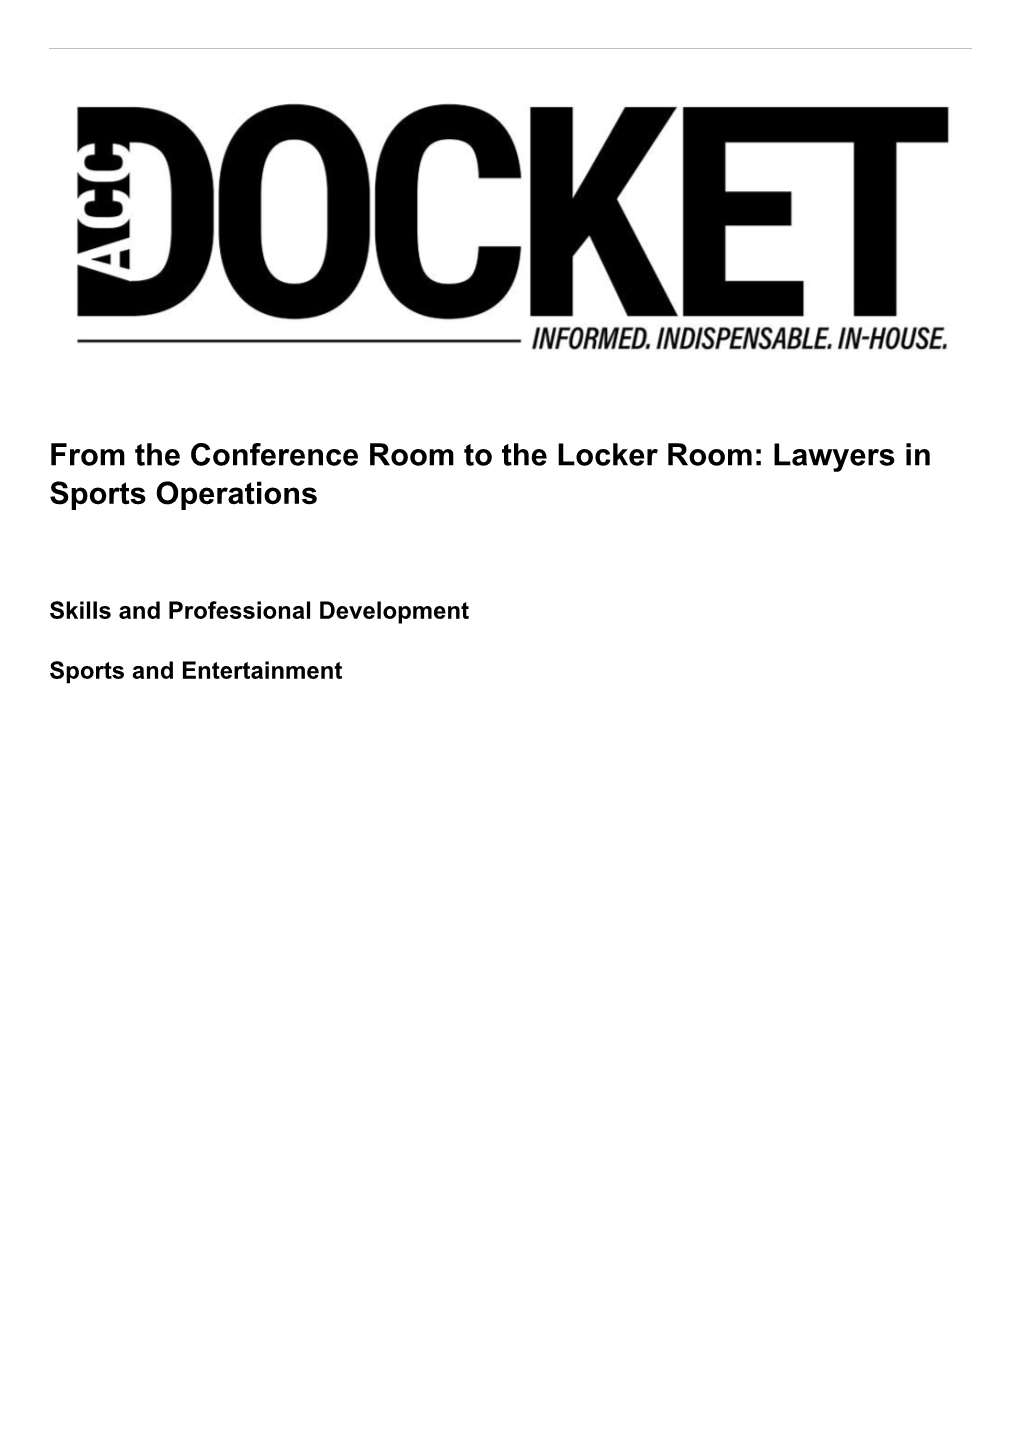 From the Conference Room to the Locker Room: Lawyers in Sports Operations